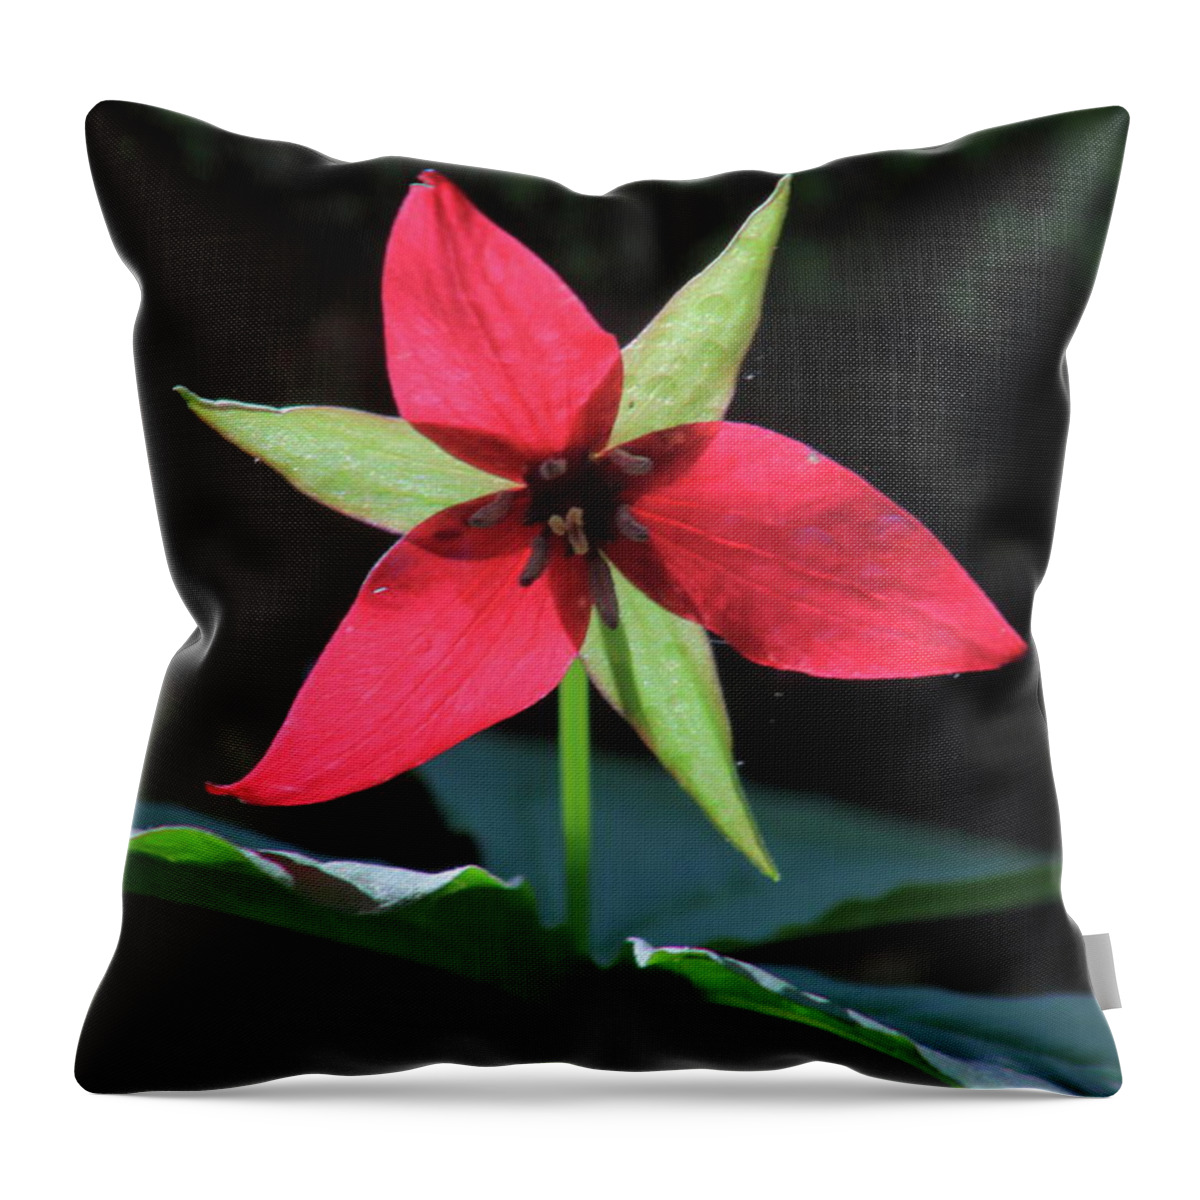 Wildflower Throw Pillow featuring the photograph Red Trillium Wildflower by John Burk